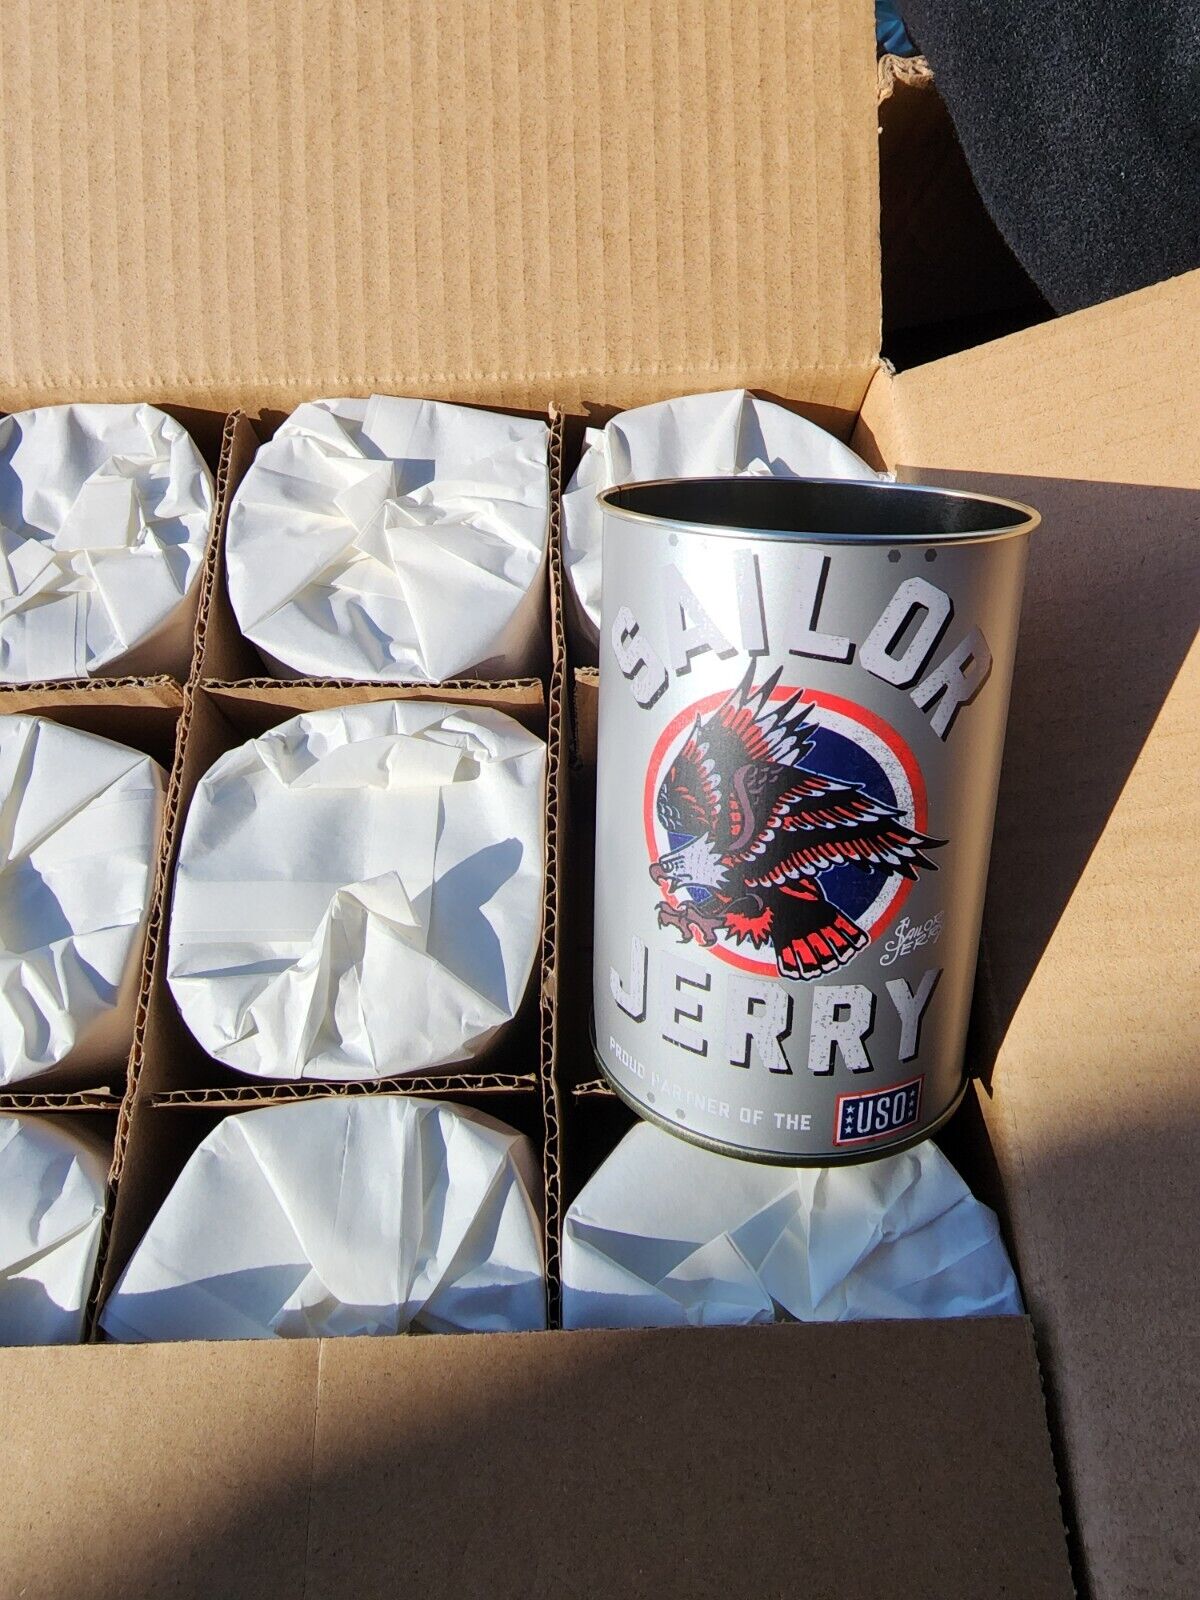 (12) Sailor Jerry Collectable Oil Cans Metal Eagle Cup Spiced Rum 8 Ball 13.5oz